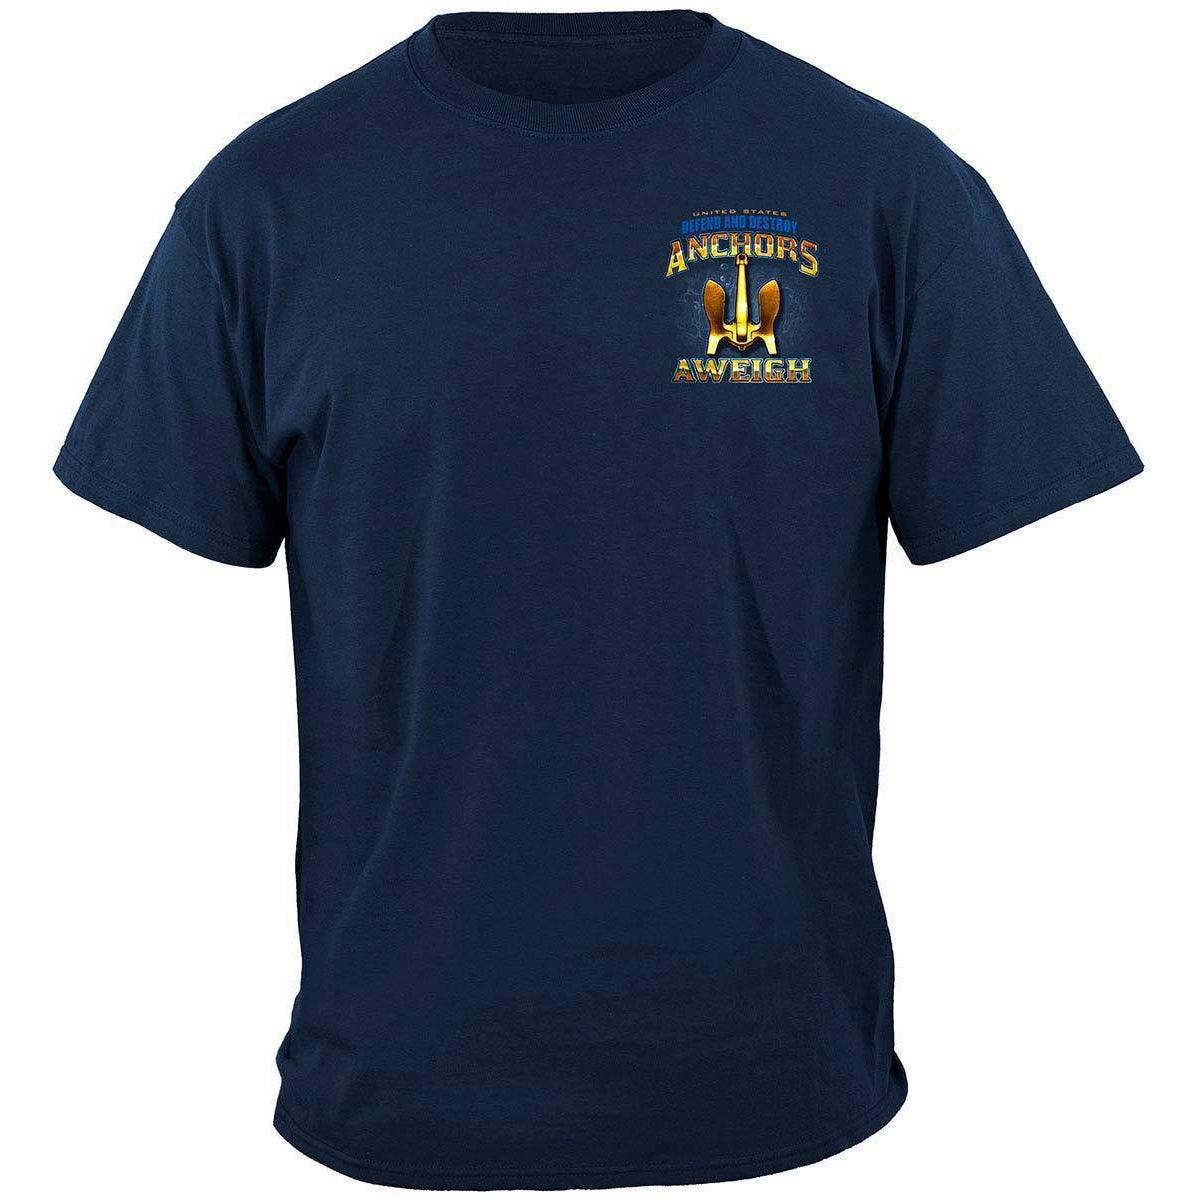 US NAVY Anchors Aweigh Defend And Destroy Premium T-Shirt - Military Republic